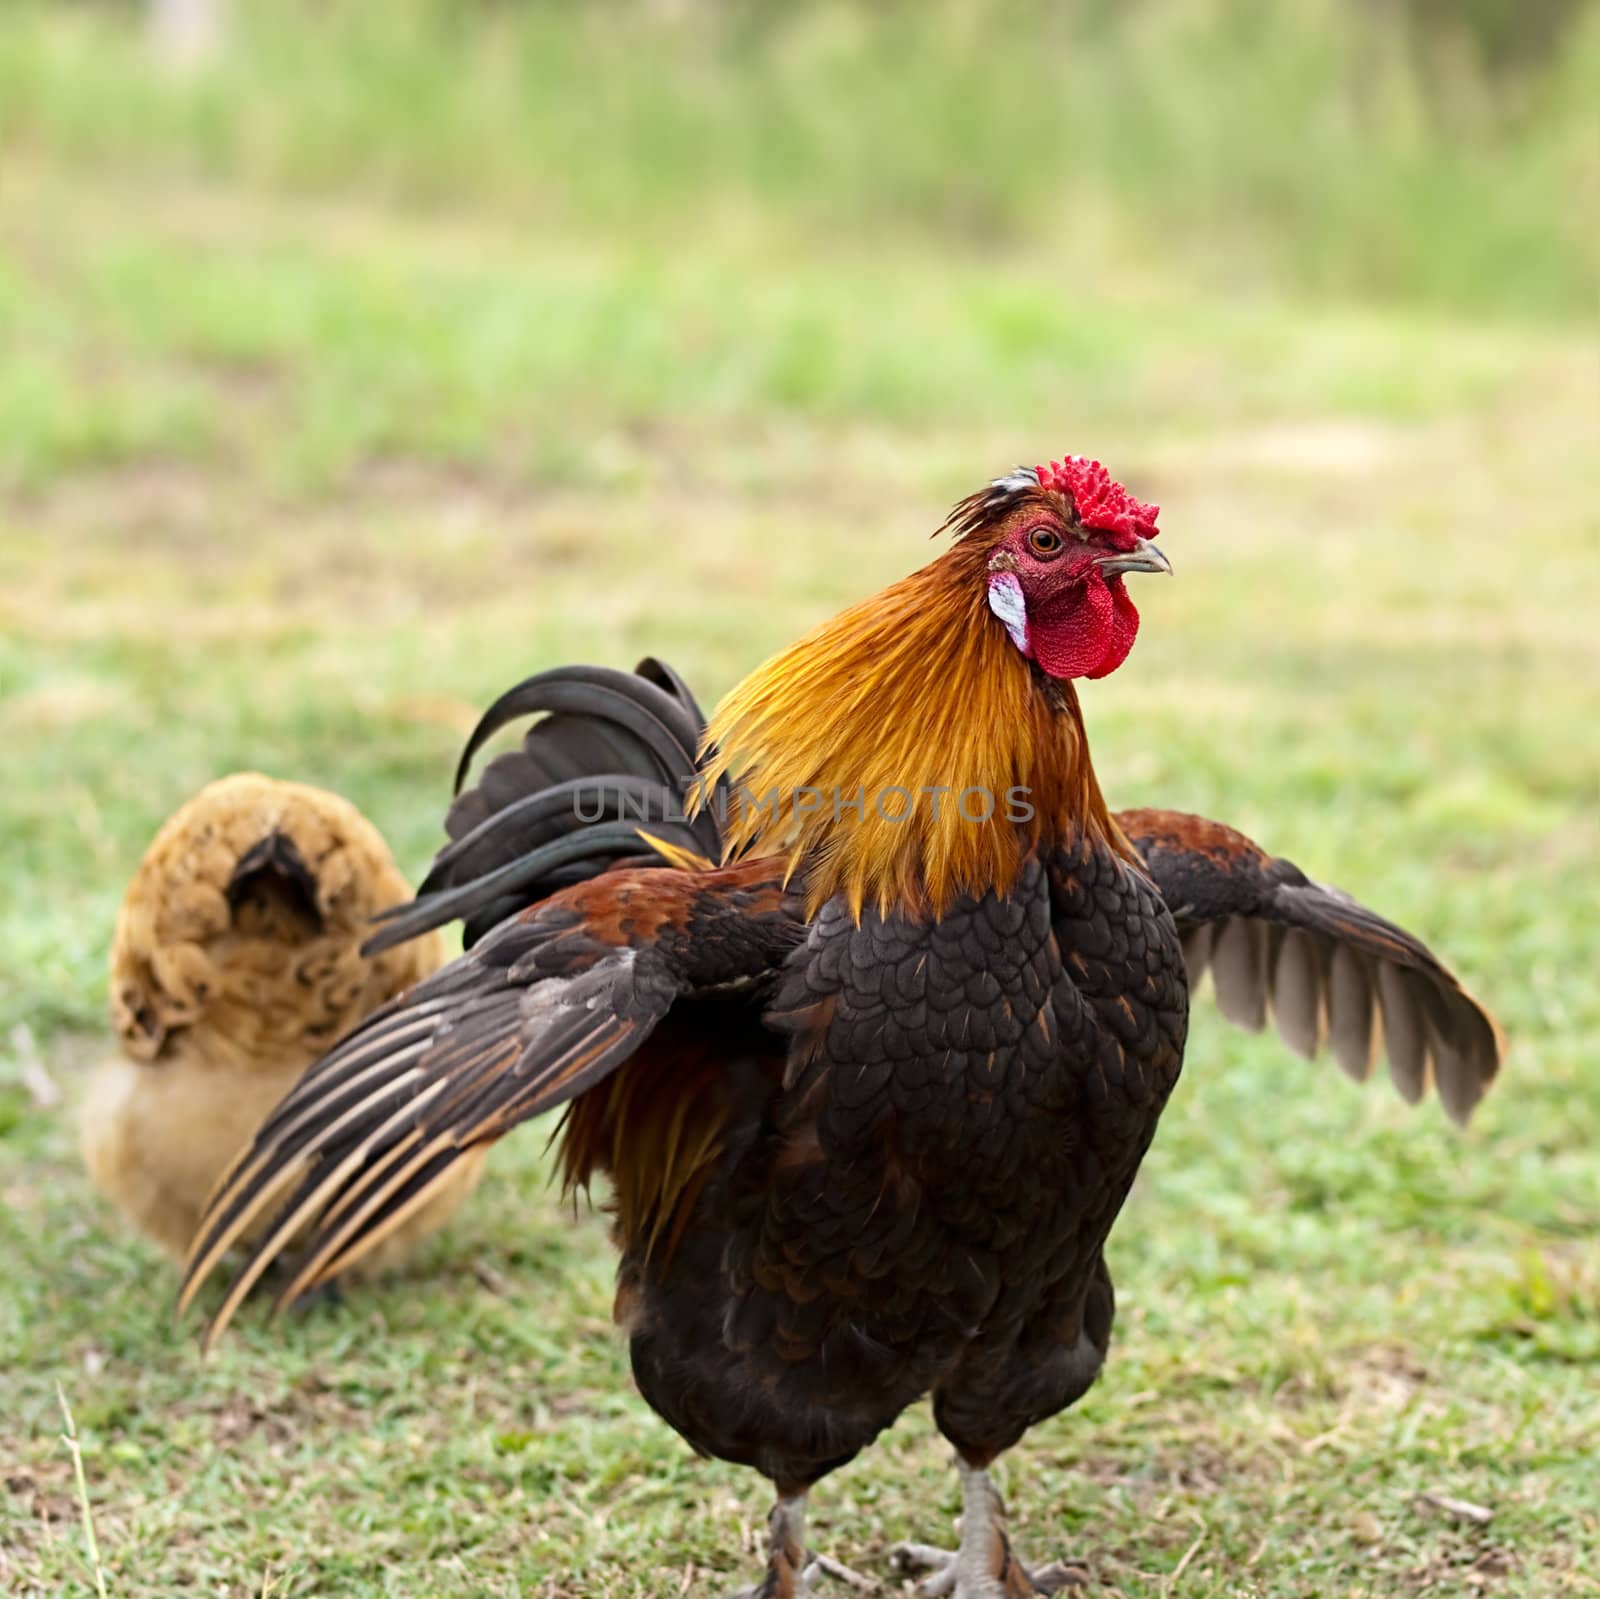 Cockerel male bantam rooster on guard protects female hen looking for food on grassy farm land